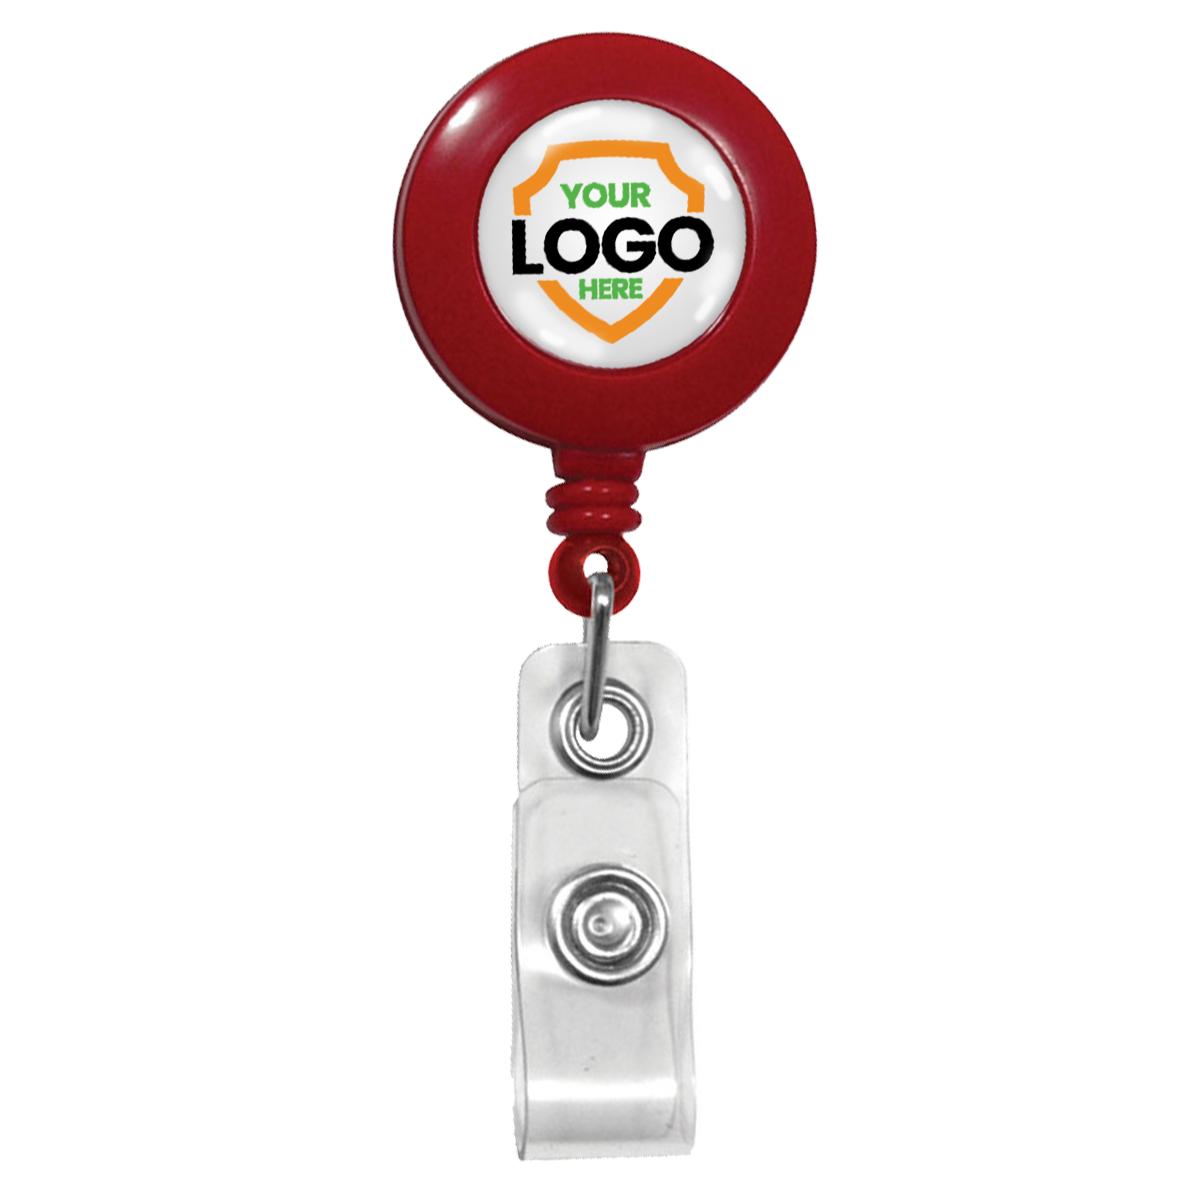 Custom Printed Retractable Badge Reels With Belt Clip - Personalize with Your Brand Logo